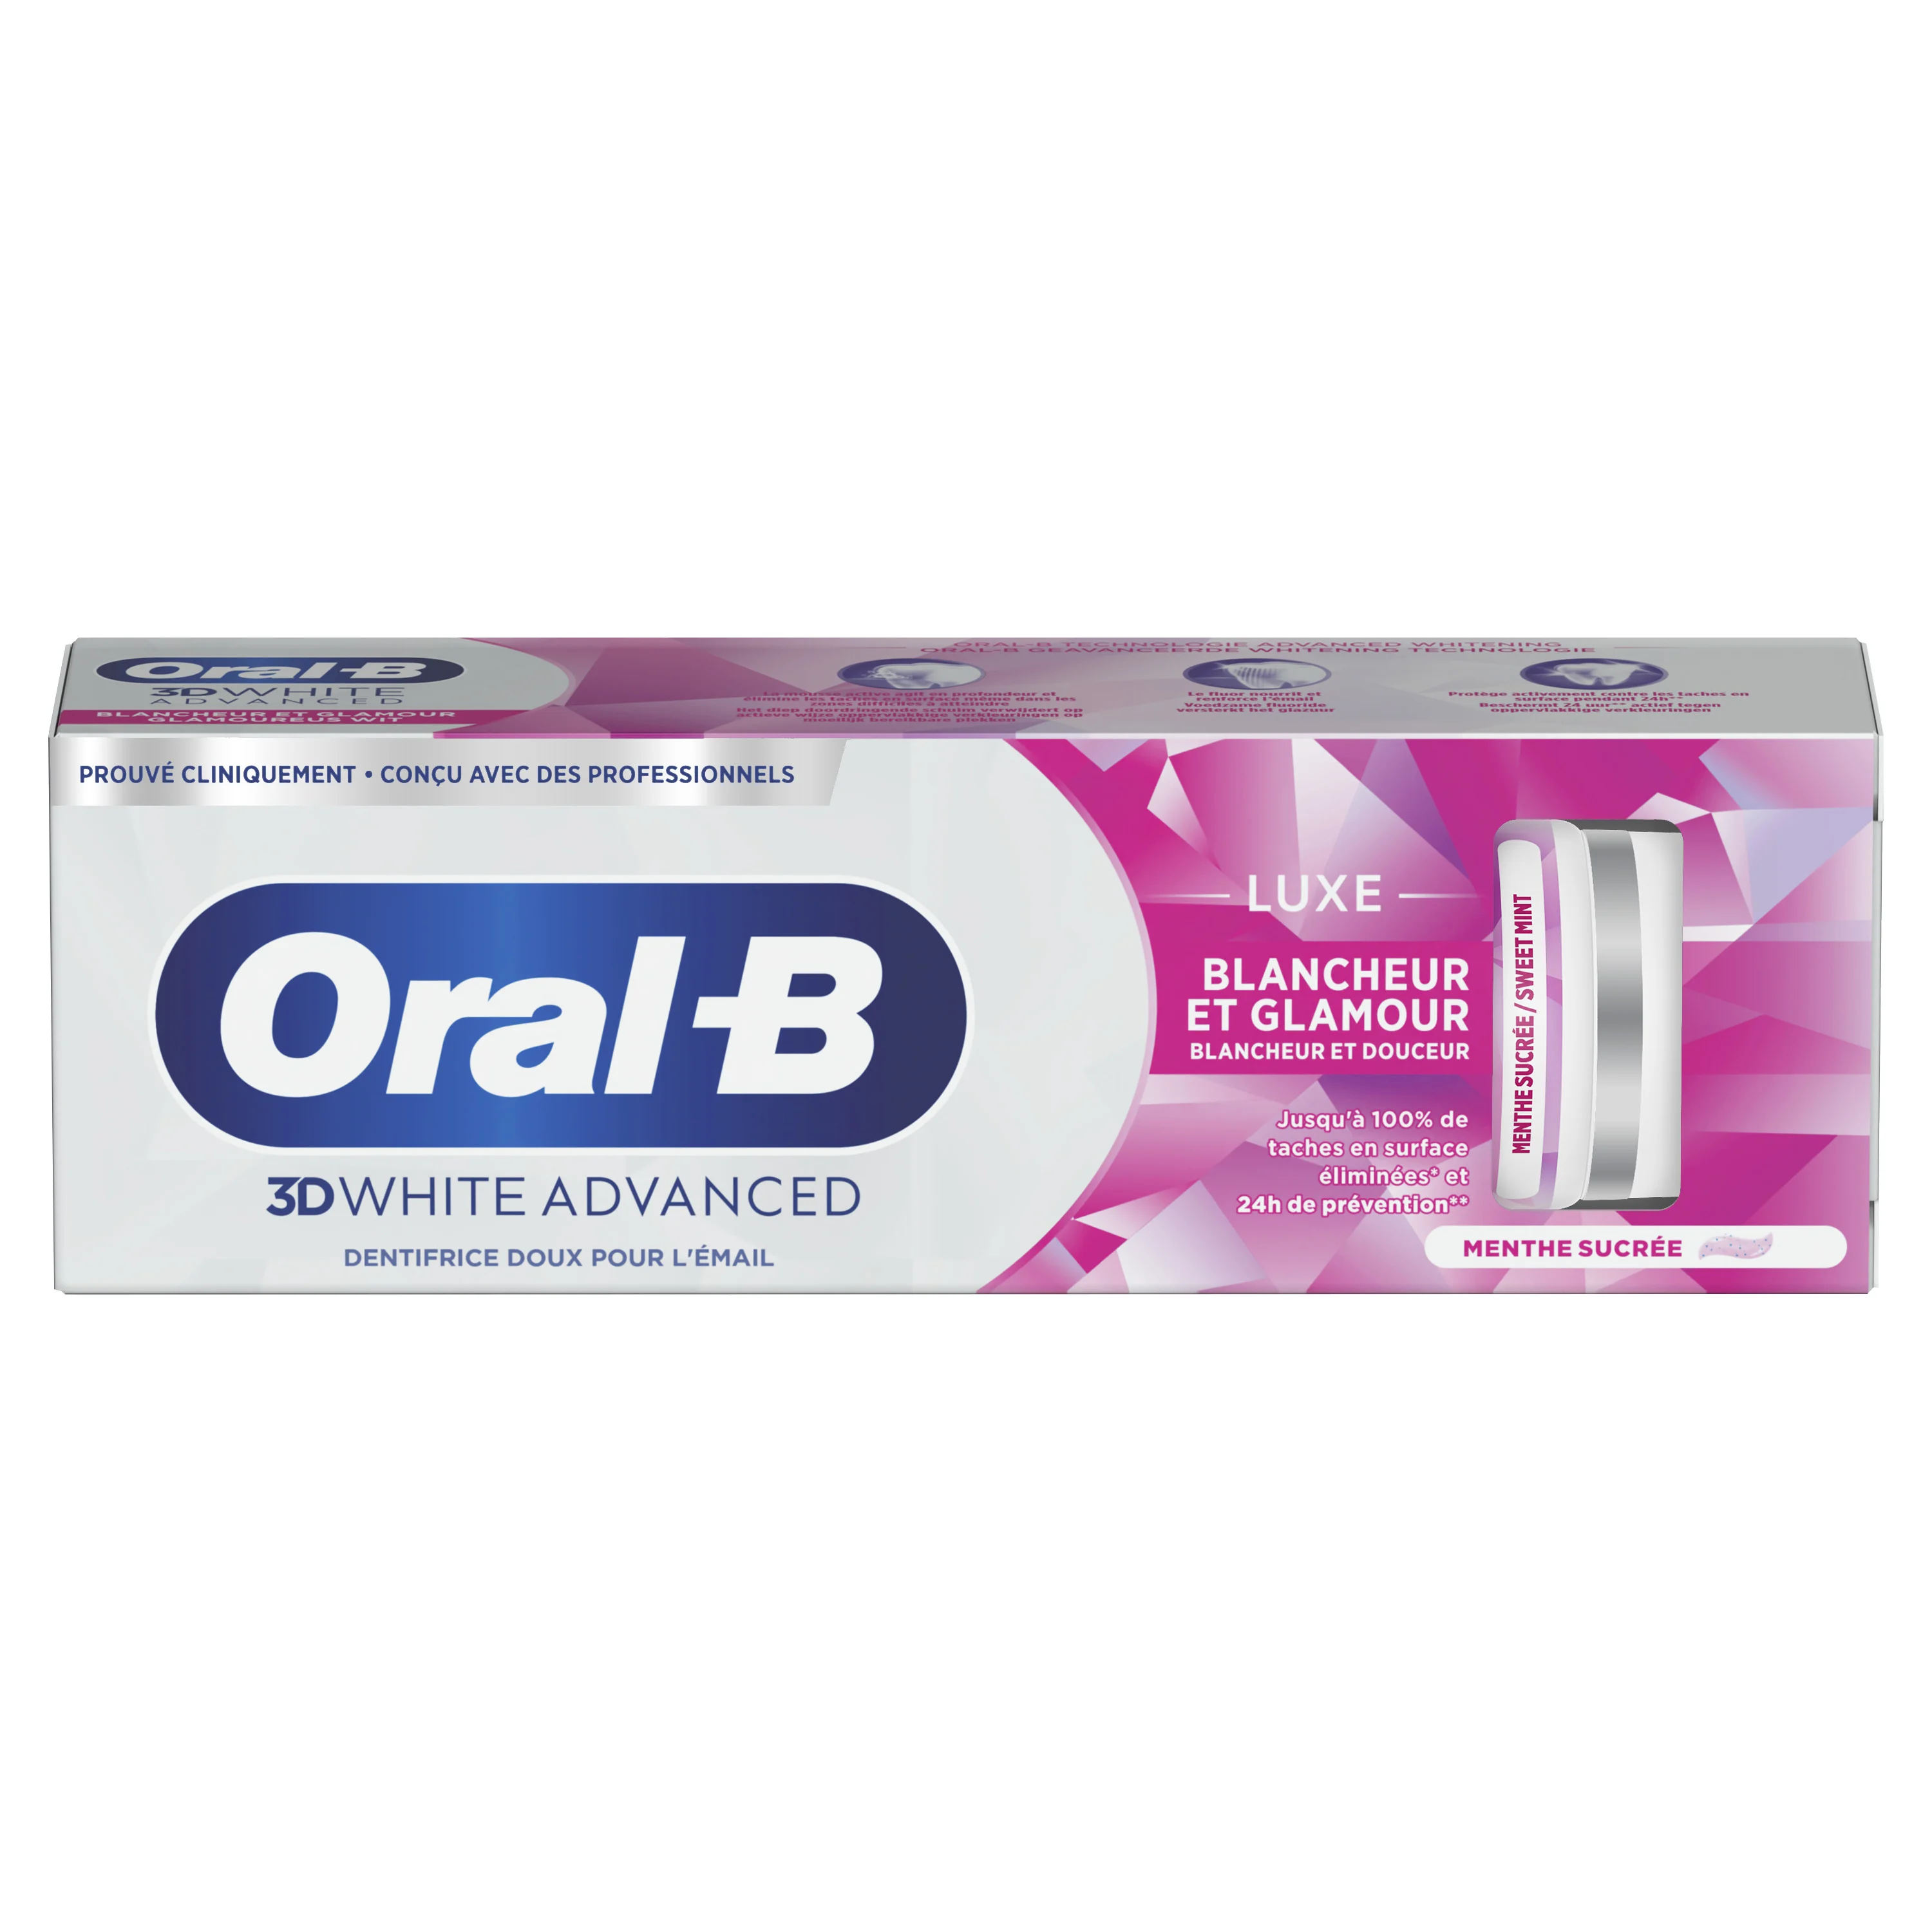 Image Product – 3D White - Oral-B 3D White Luxe Blancheur et Glamour dentifrice - FR – FR 